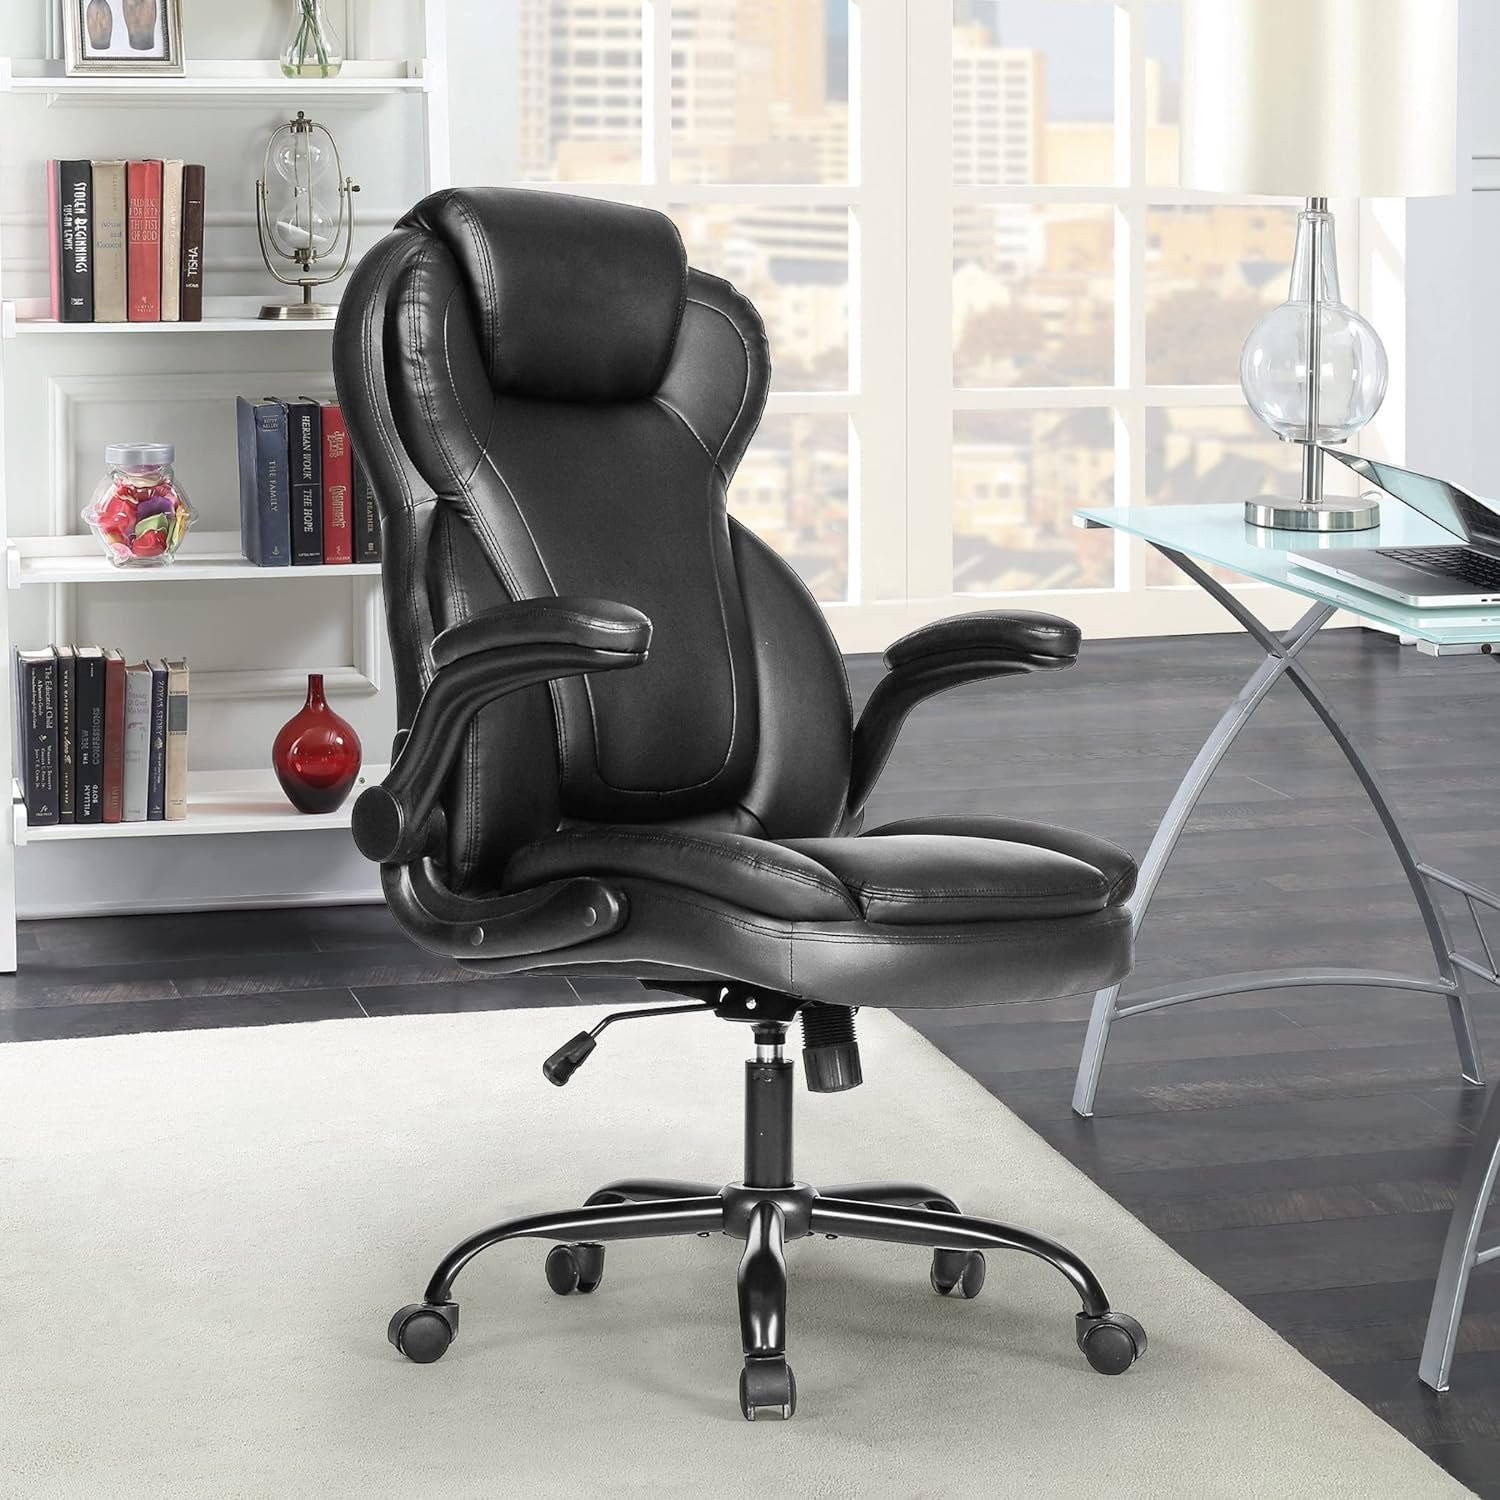 Big and Tall Office Chair 400lbs-Heavy Duty Executive Desk Chair with Extra Wide Seat, High Back Ergonomic Leather Computer Chair with Tilt RockTension, Padded Armrests-Black